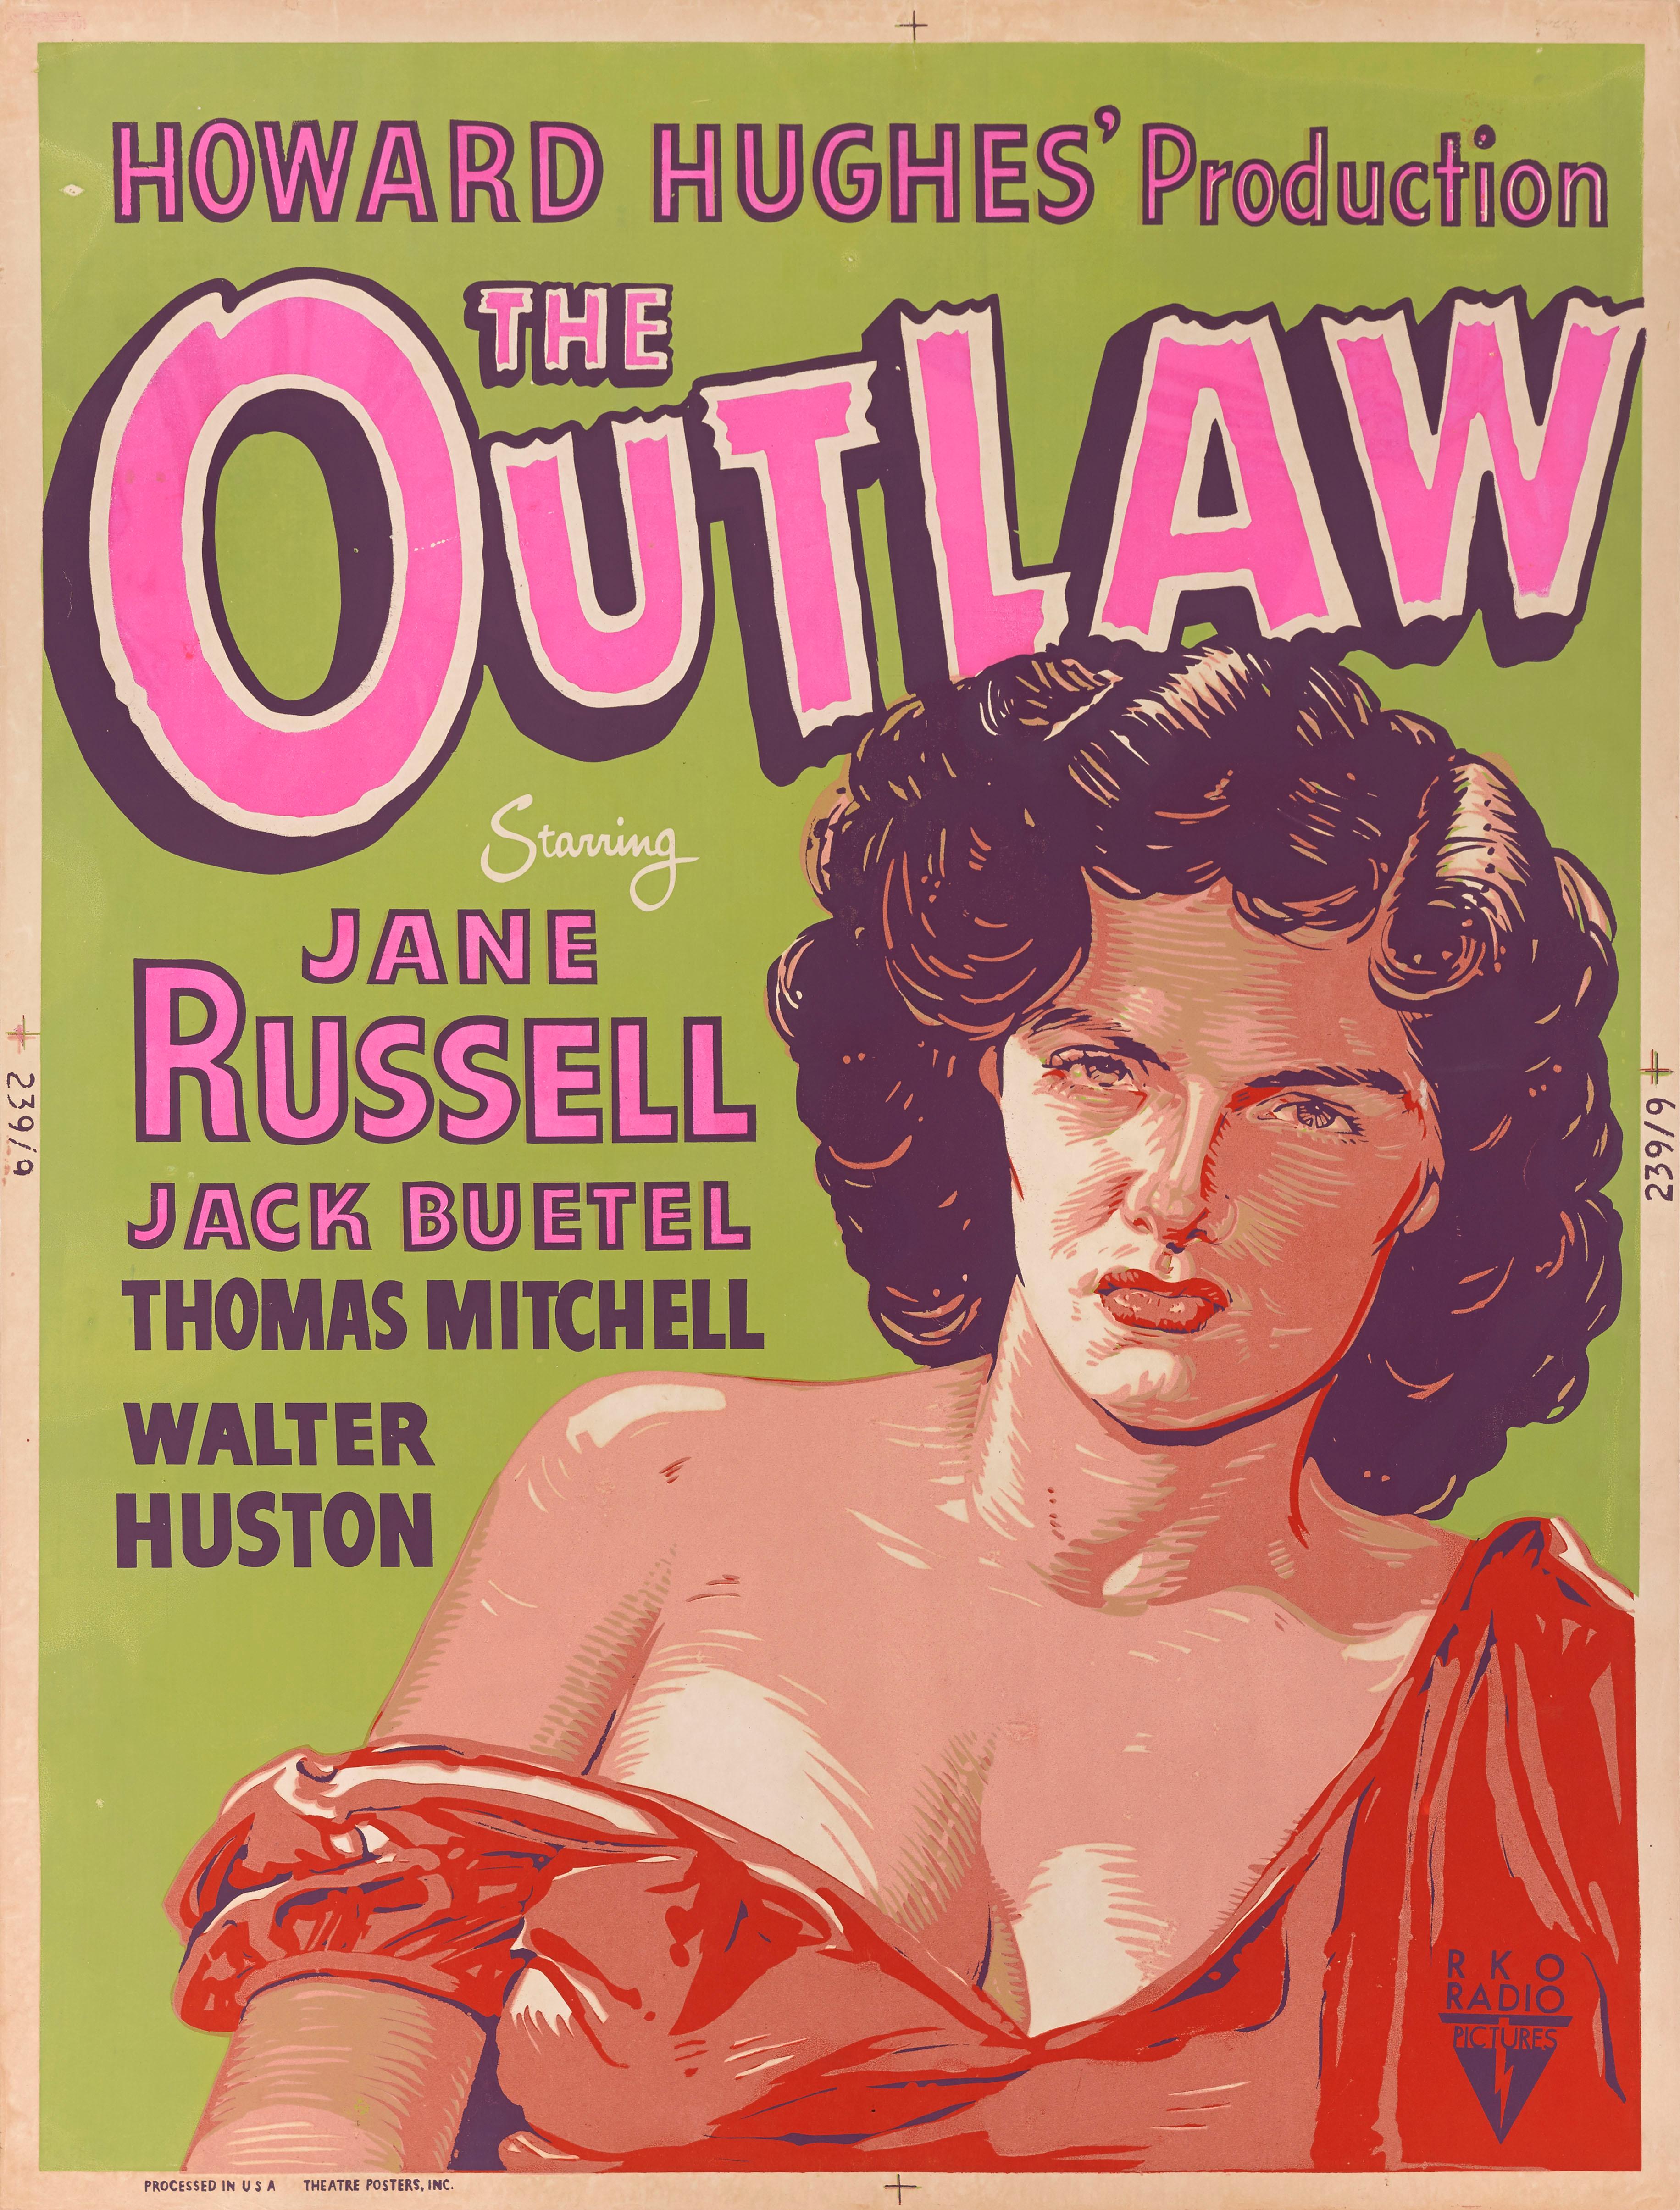 Original US film poster for The Outlaw 1942
This poster was designed for the 1950 US re-release of the film.
It is a very rare size and was and very few are know to have survived.
Howard Hughes, who produced and directed this sexy western, had a